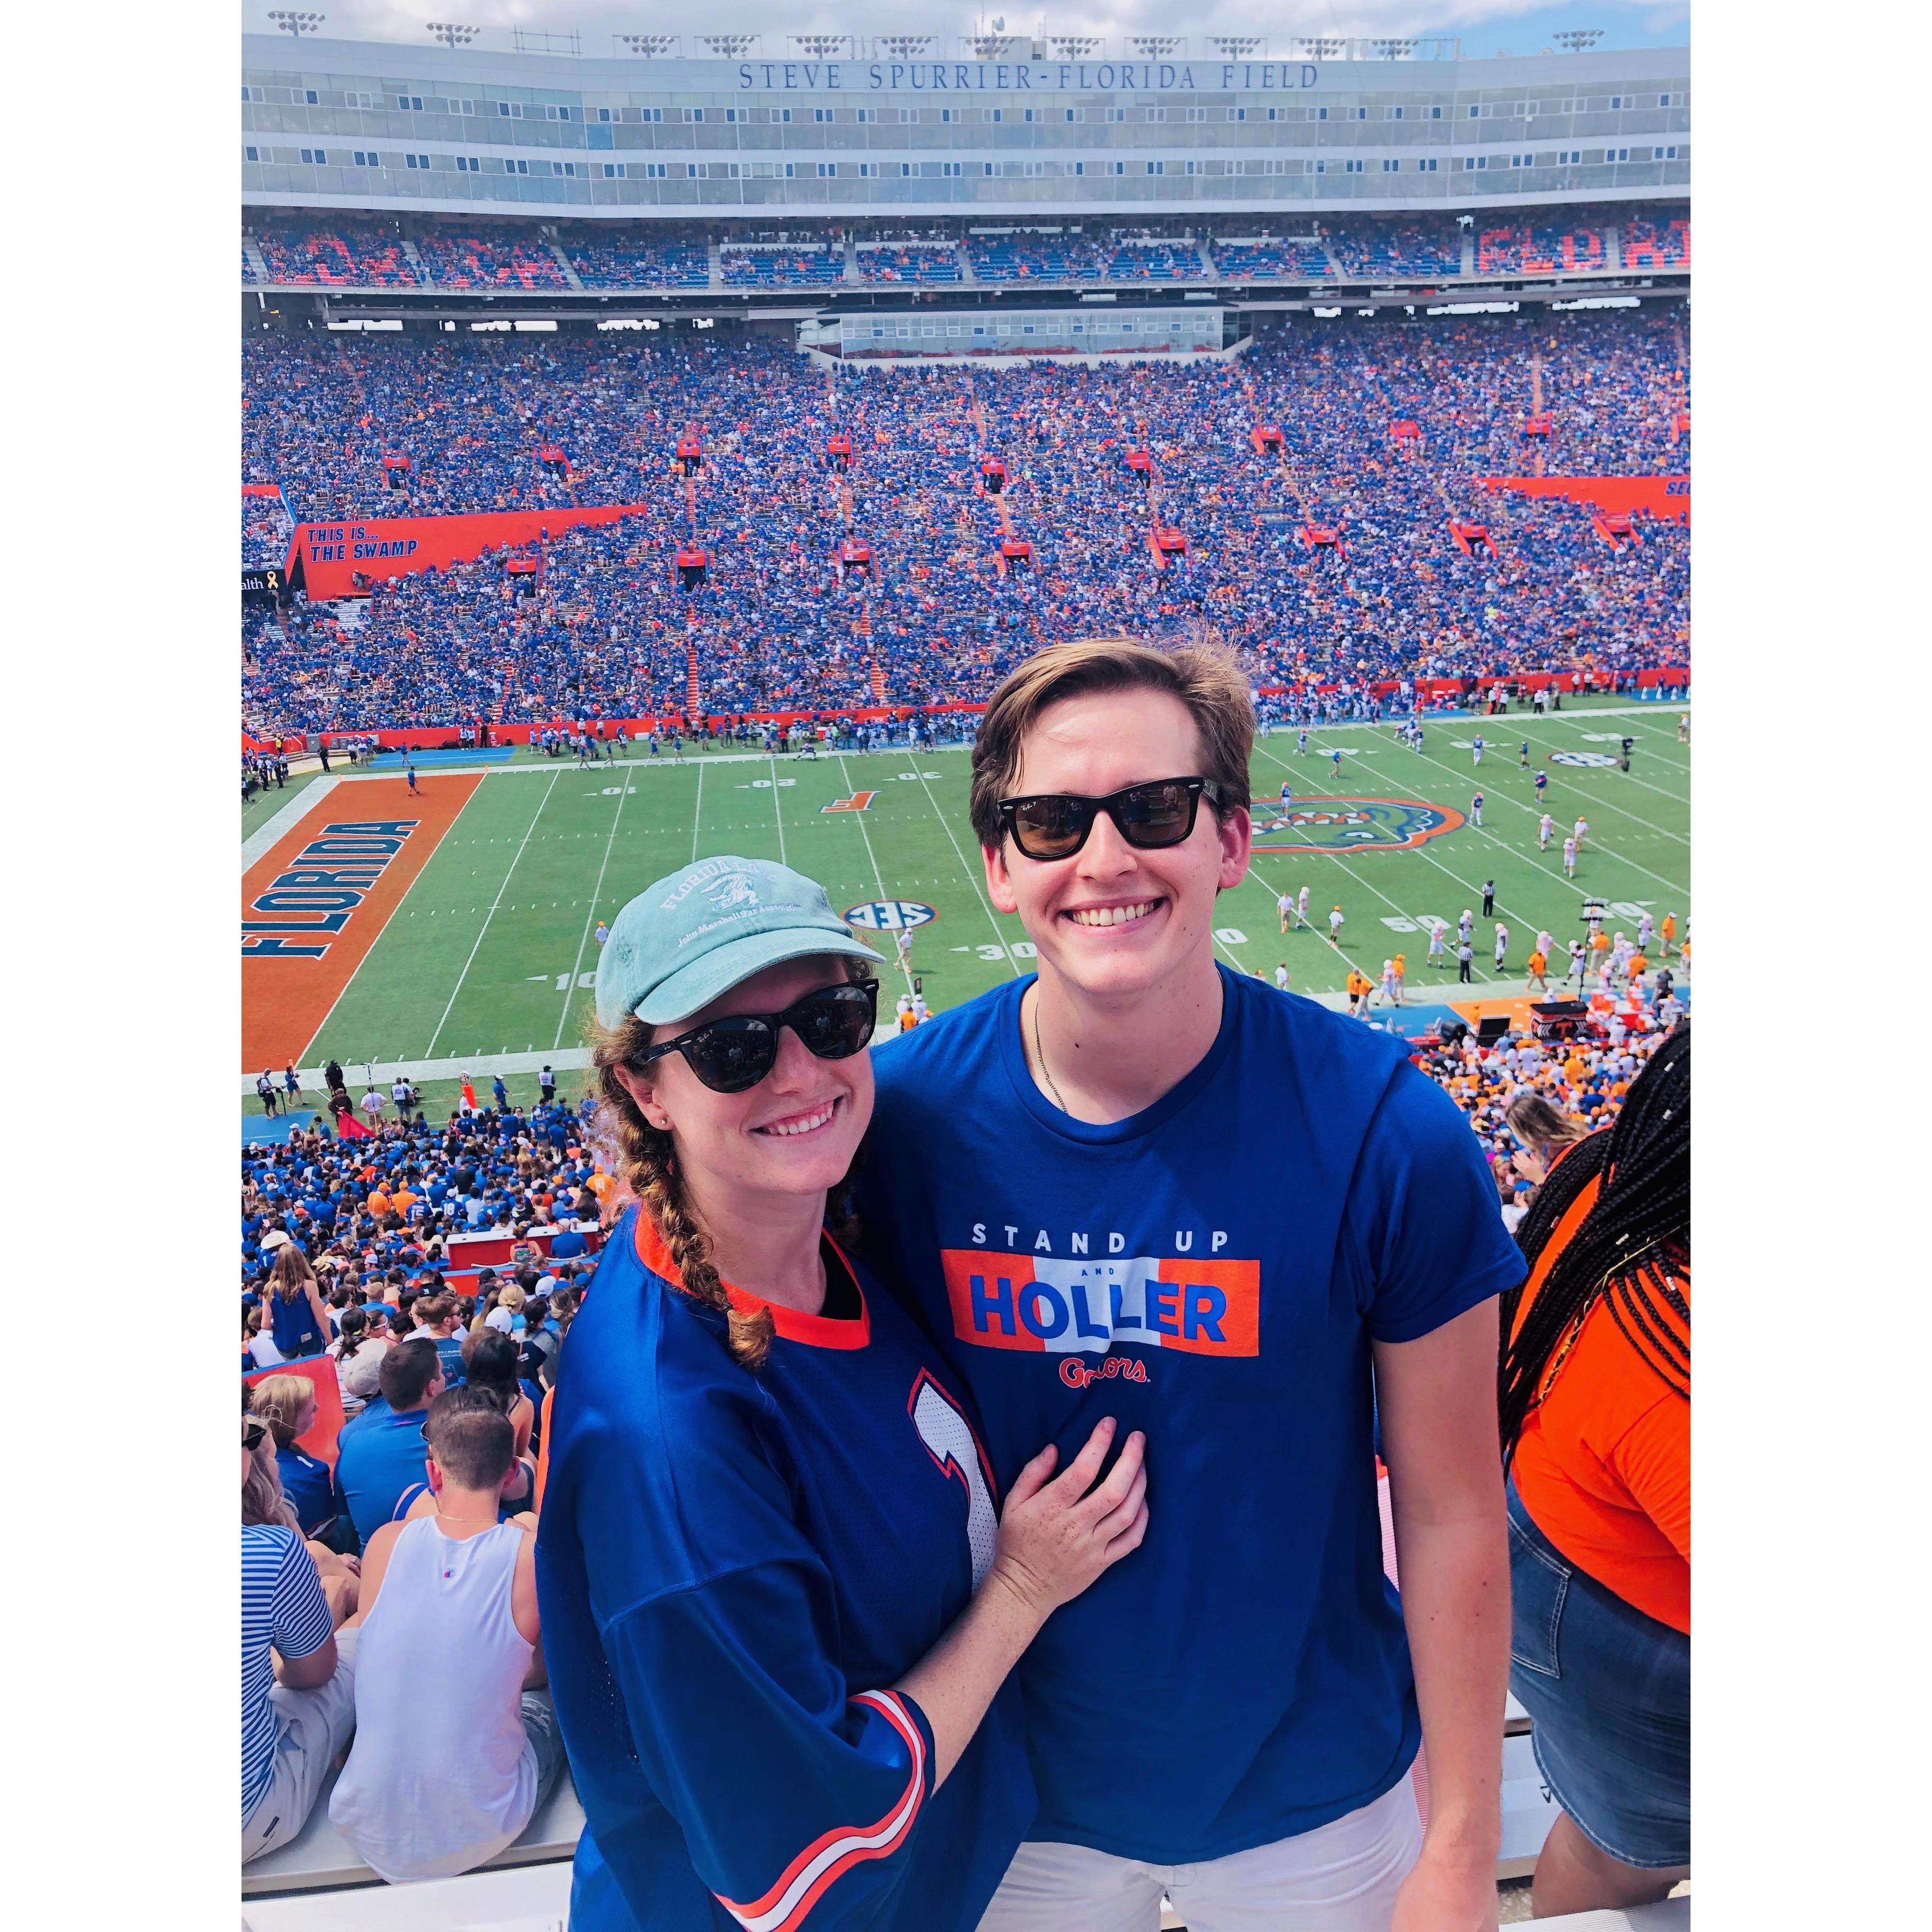 Gator victory over Tennessee